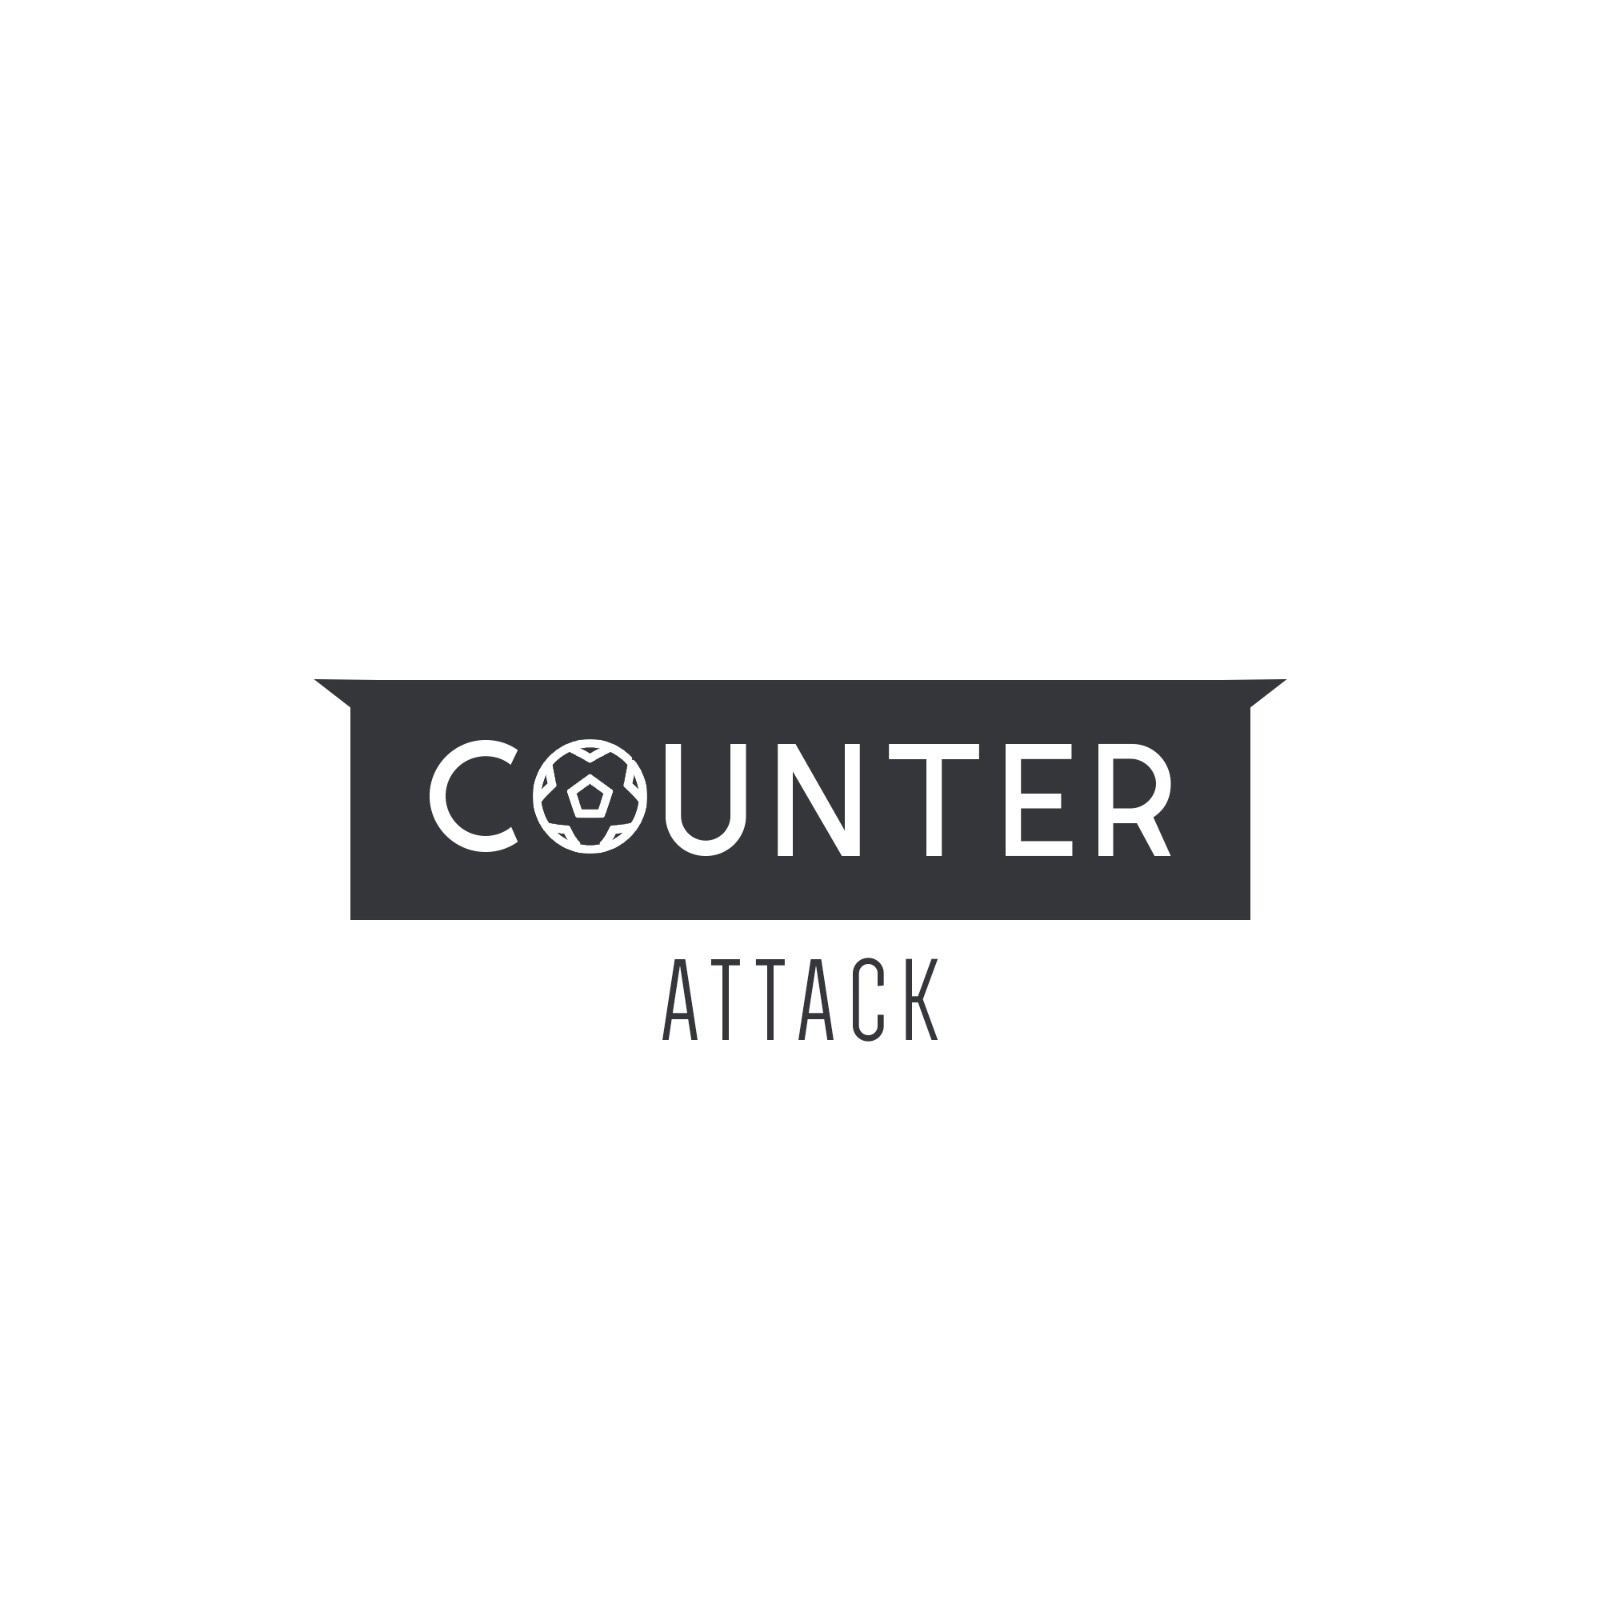 Counter Attack - Episode 78 - Lamps Criticism Gone Way Too VAR?